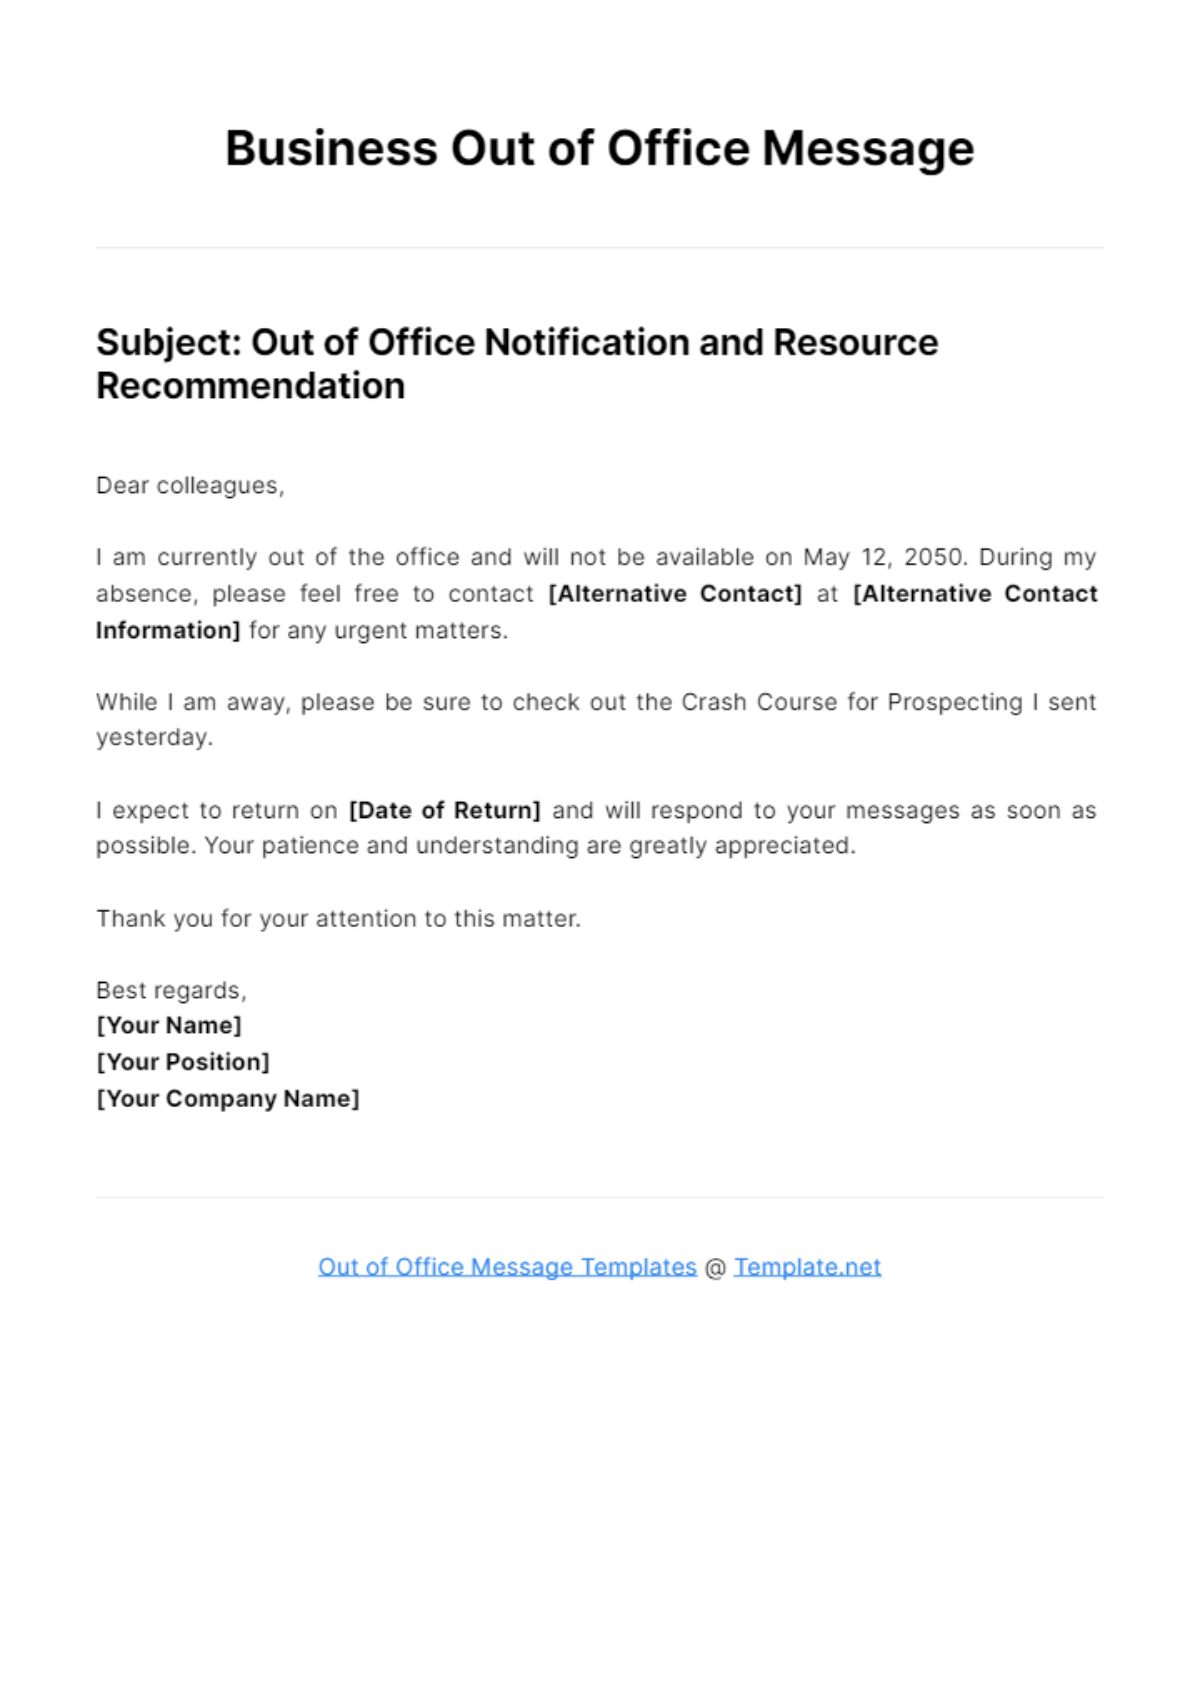 Business Out of Office Message Template